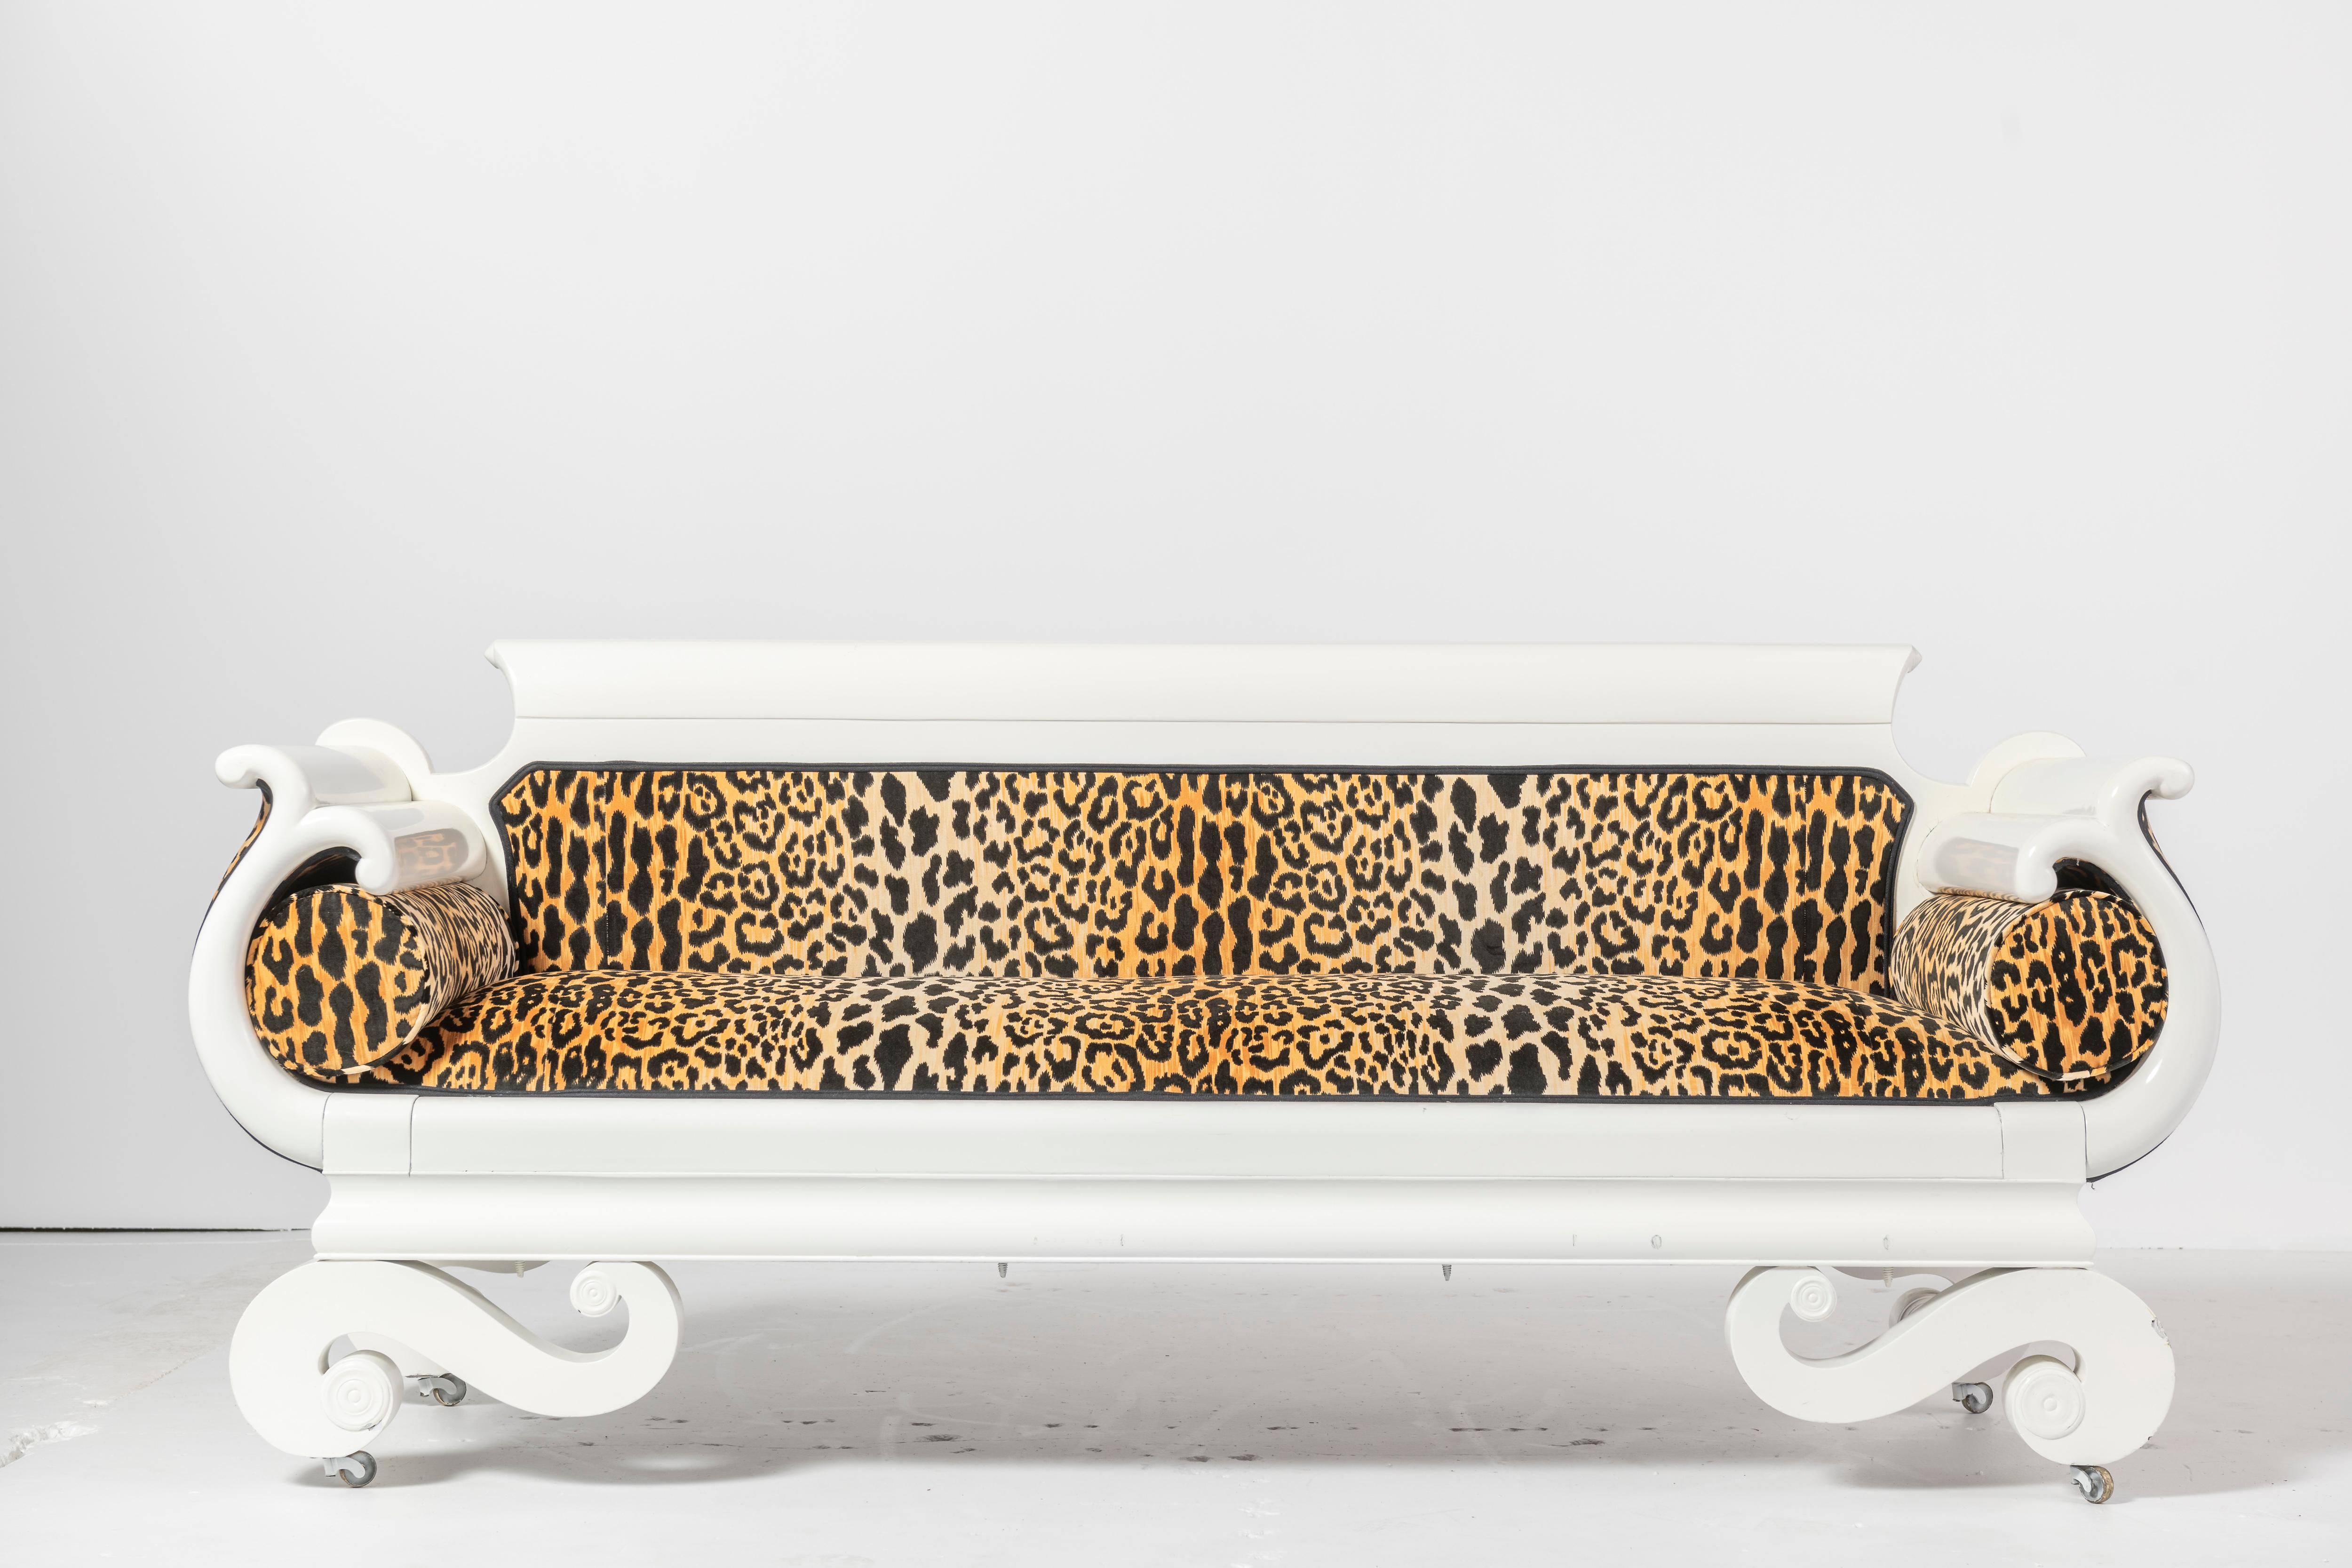 Great statement piece with white lacquer wood finish and leopard printed upholstery. Loads of drama for either a simple or layered decor.